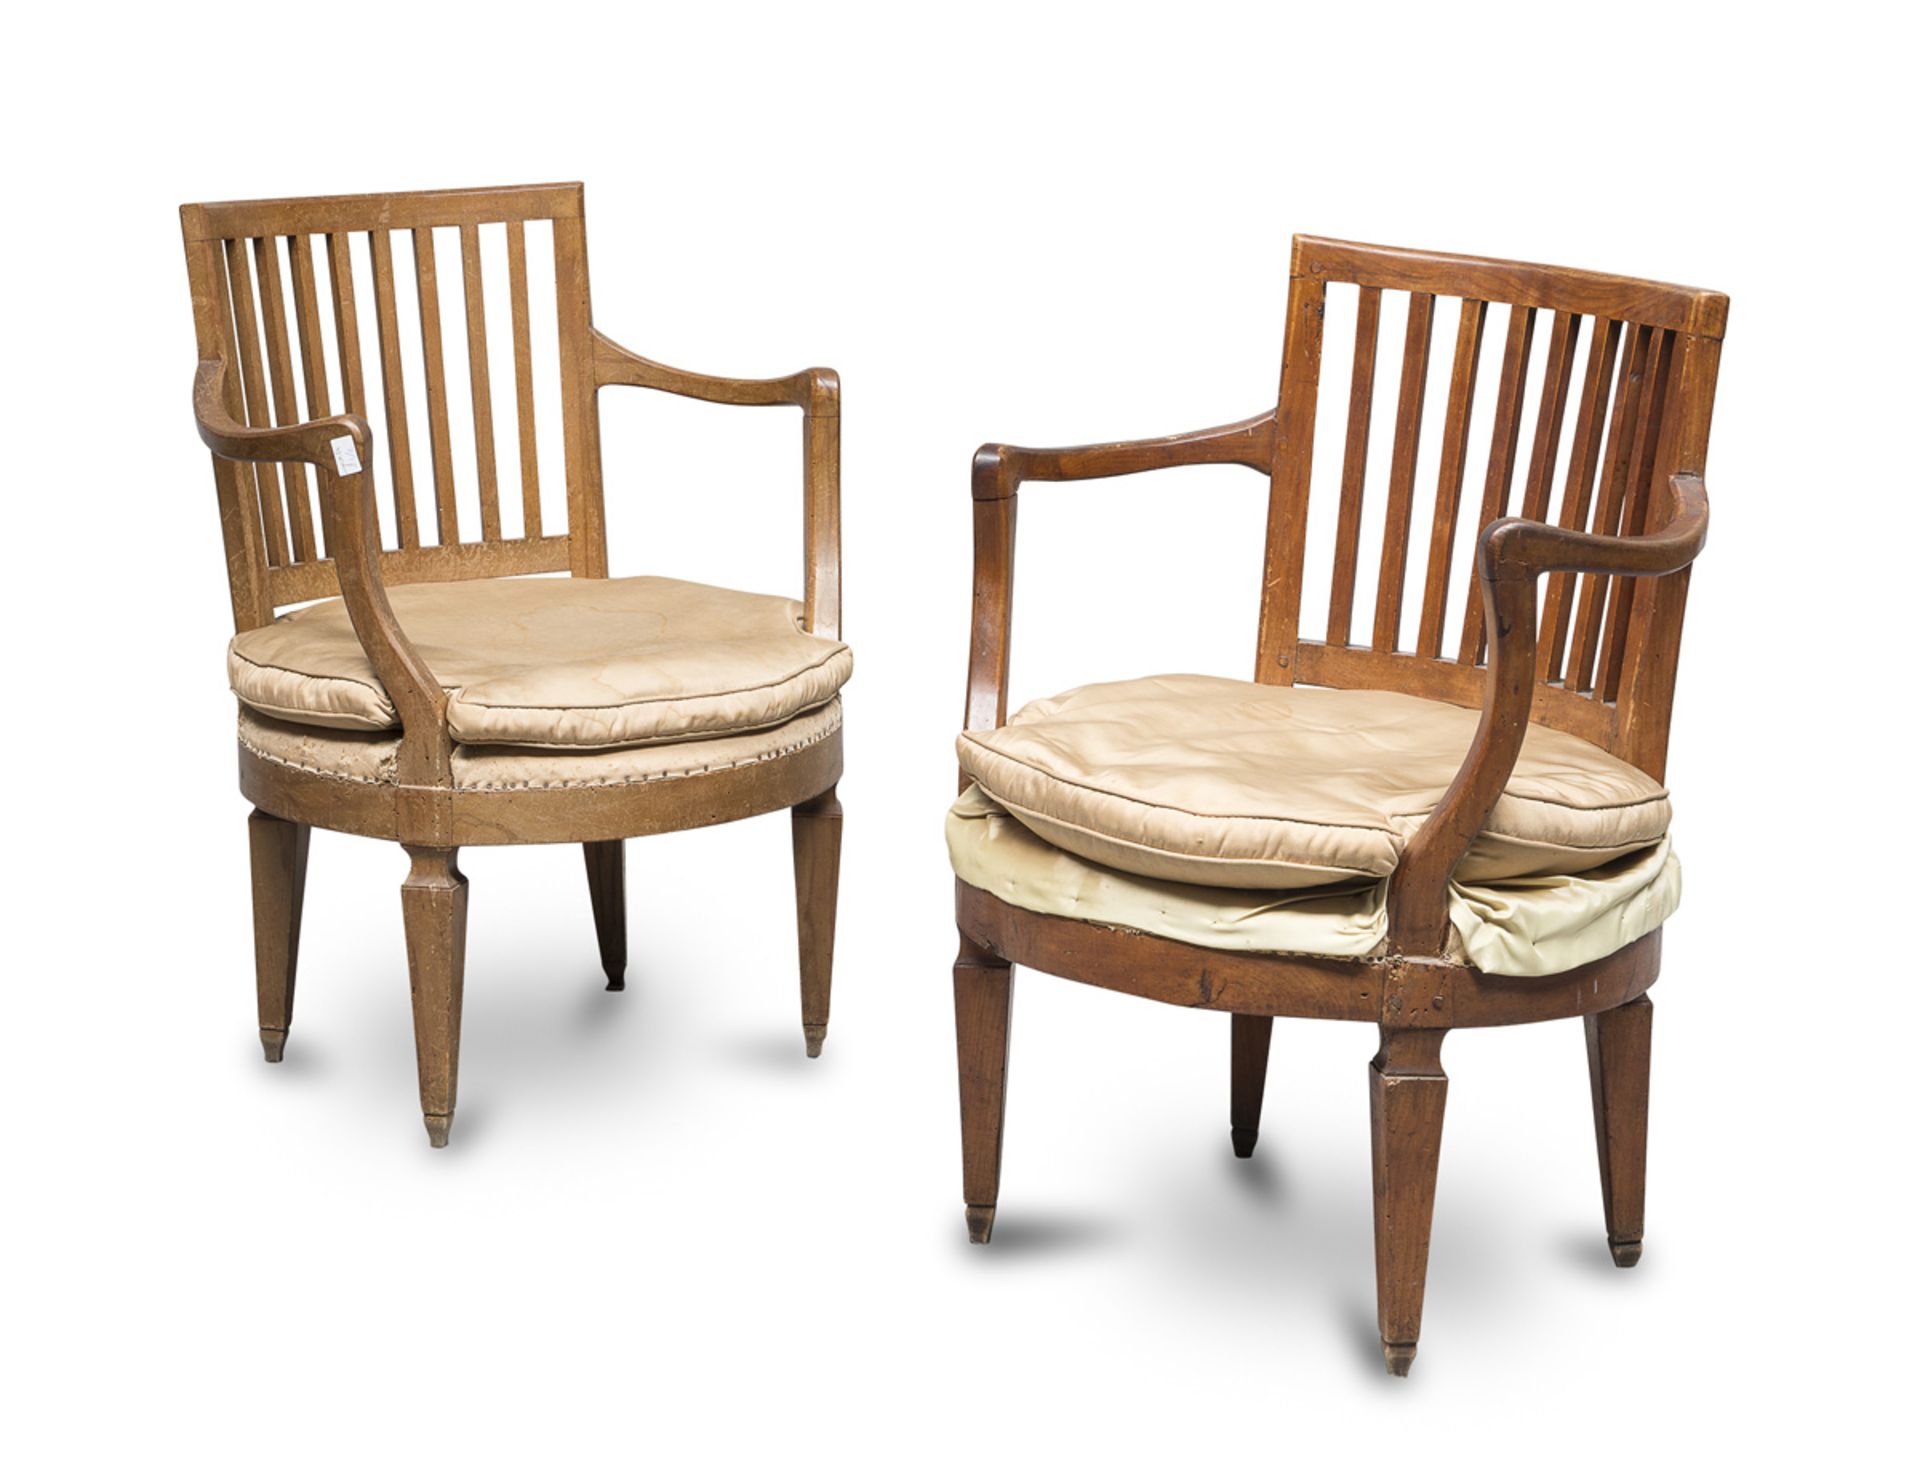 PAIR OF ARMCHAIRS IN WALNUT PIEDMONT OR LOMBARDY OF THE 18TH CENTURY